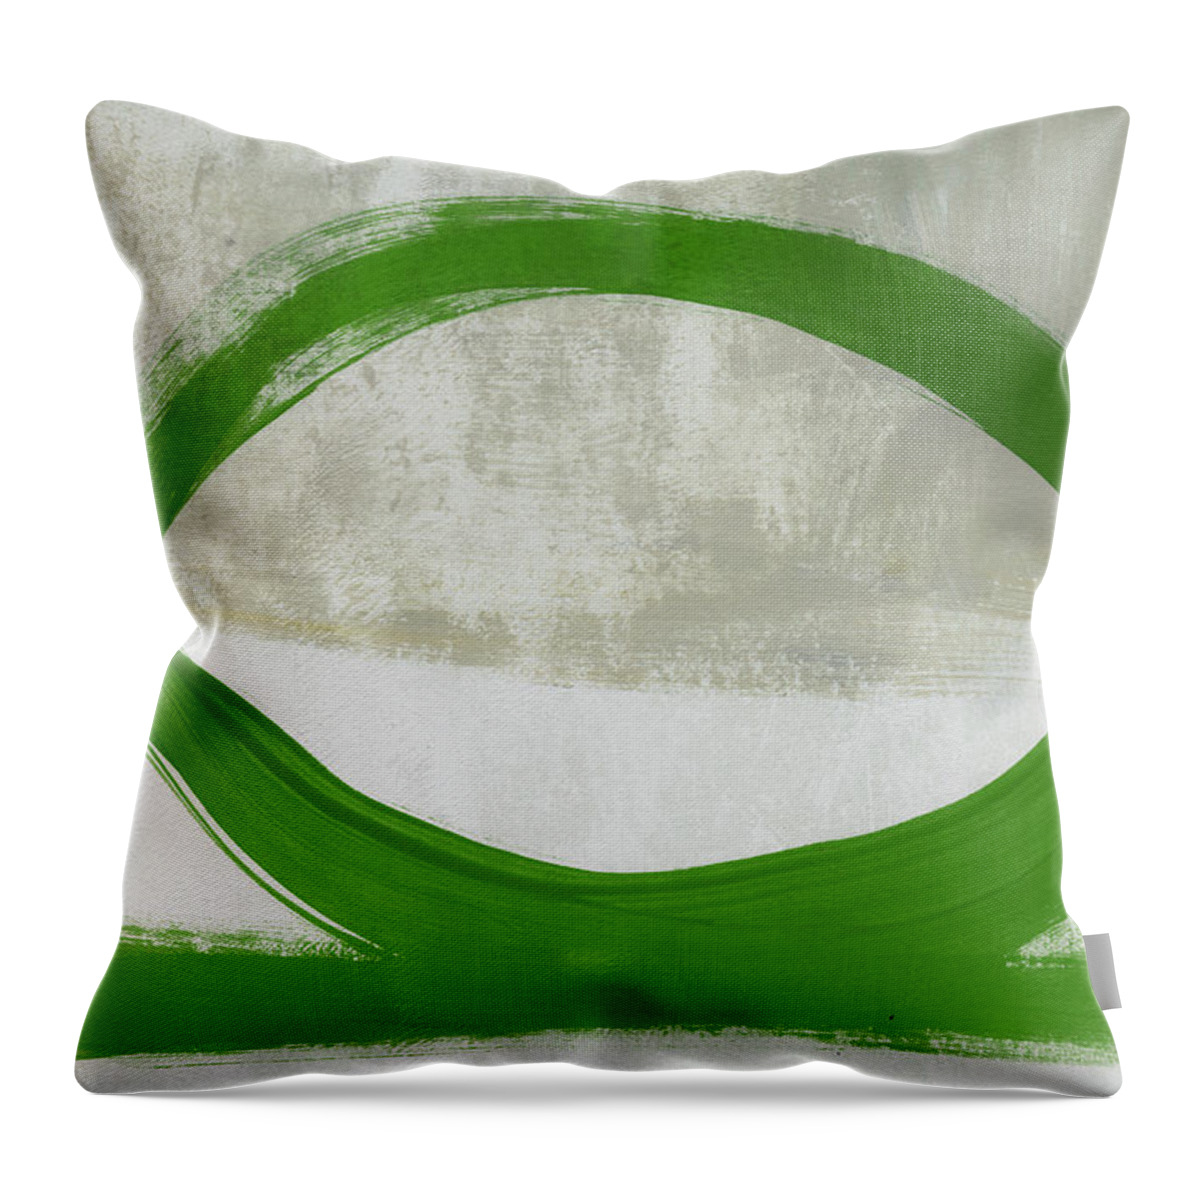 Abstract Throw Pillow featuring the painting Green Abstract Circle Vertical- Art by Linda Woods by Linda Woods